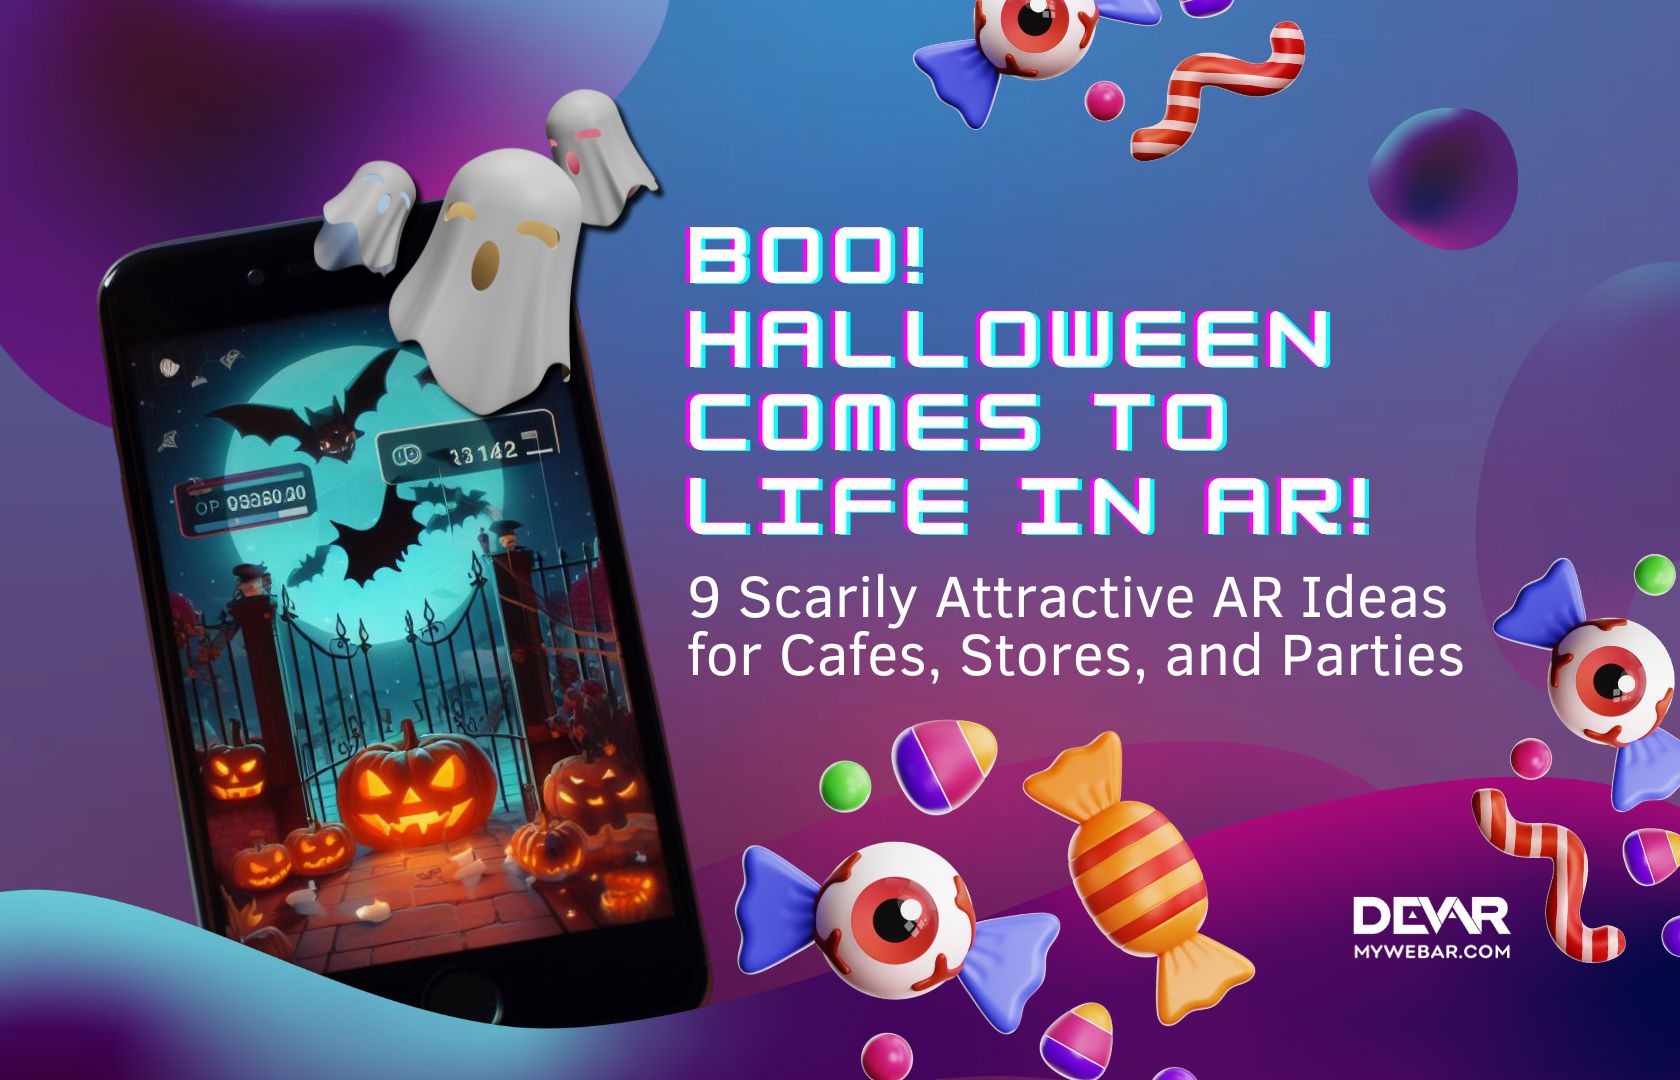 Boo! Halloween Comes to Life in AR!